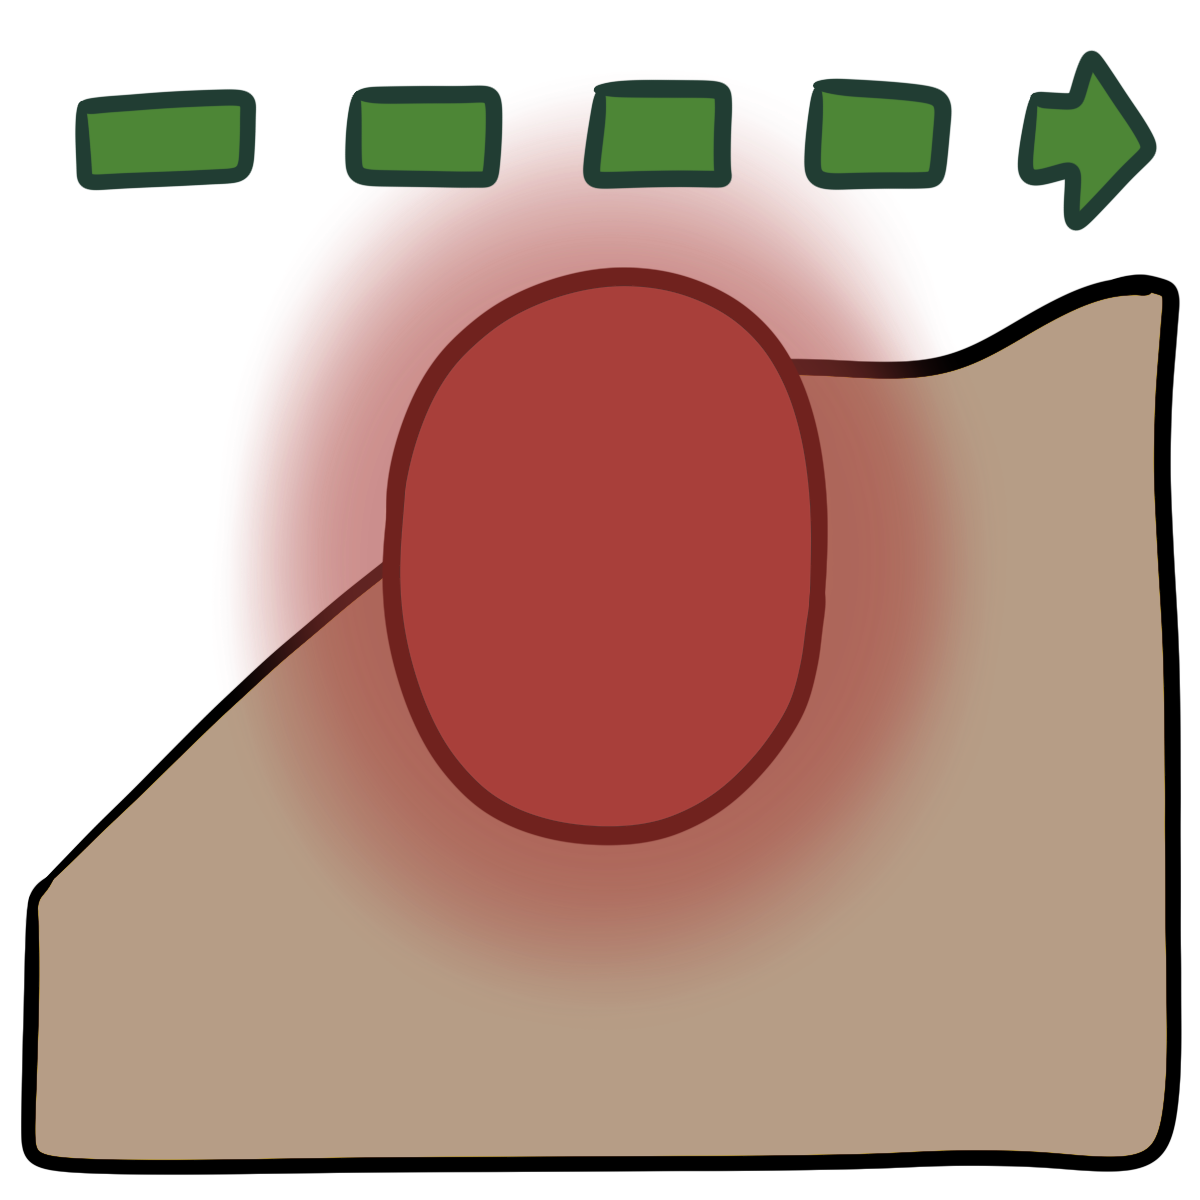 A dashed line green arrow pointing right. There is a glowing red oval in the center. Curved beige skin fills the bottom half of the background.